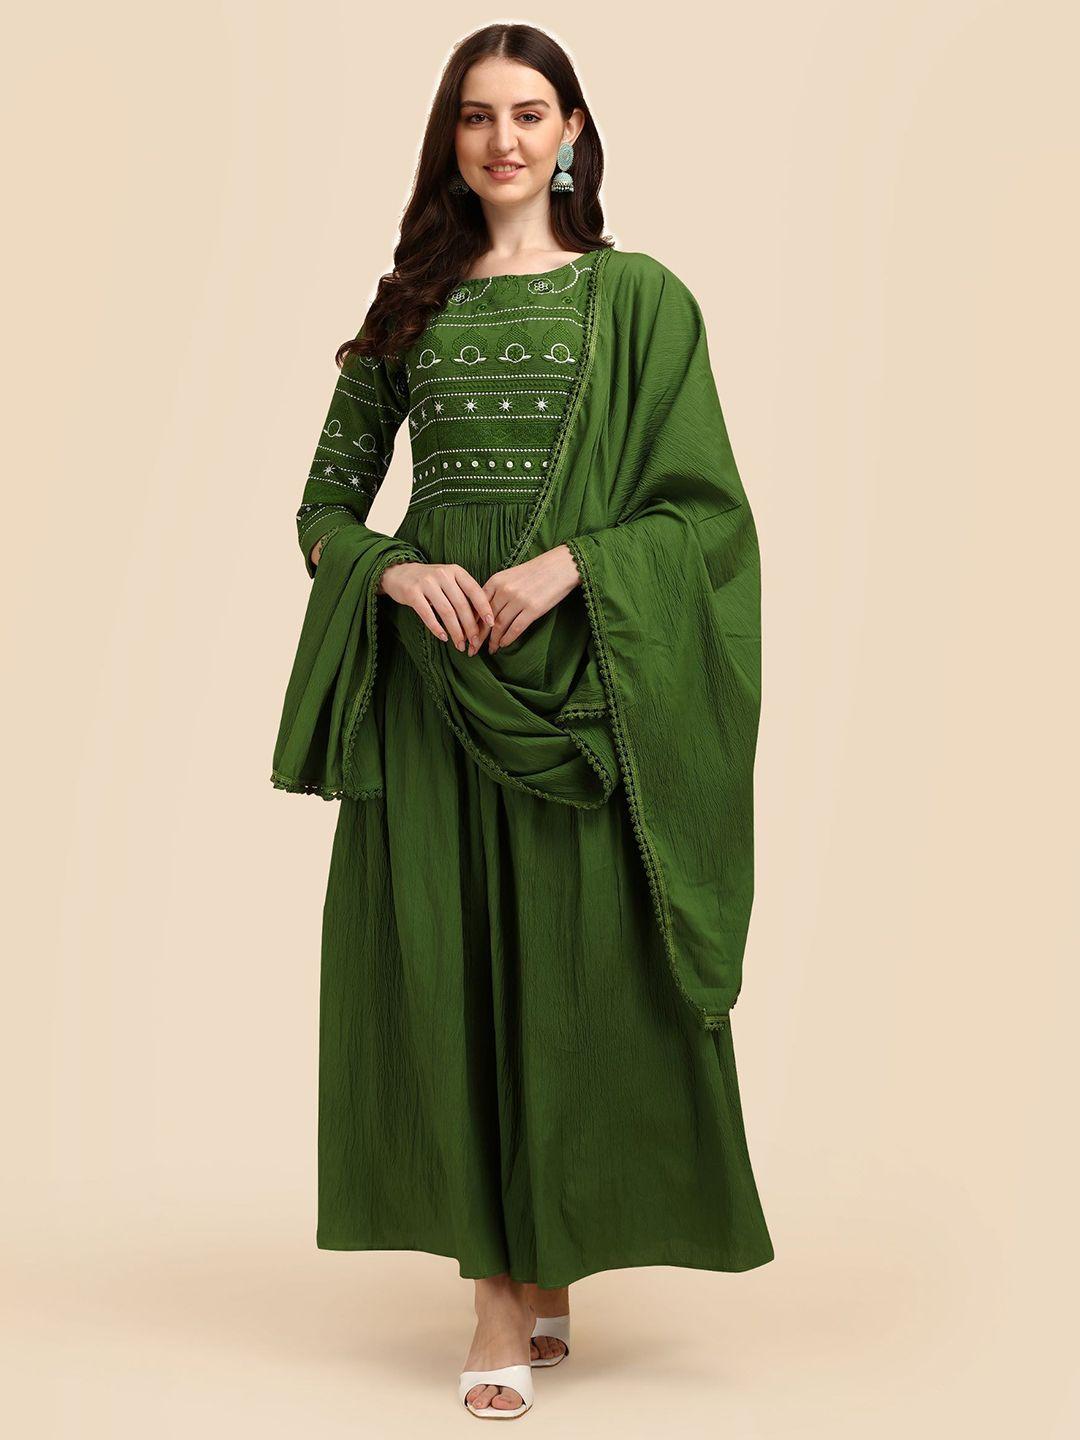 vidraa western store floral embroidered a-line ethnic dresses with dupatta